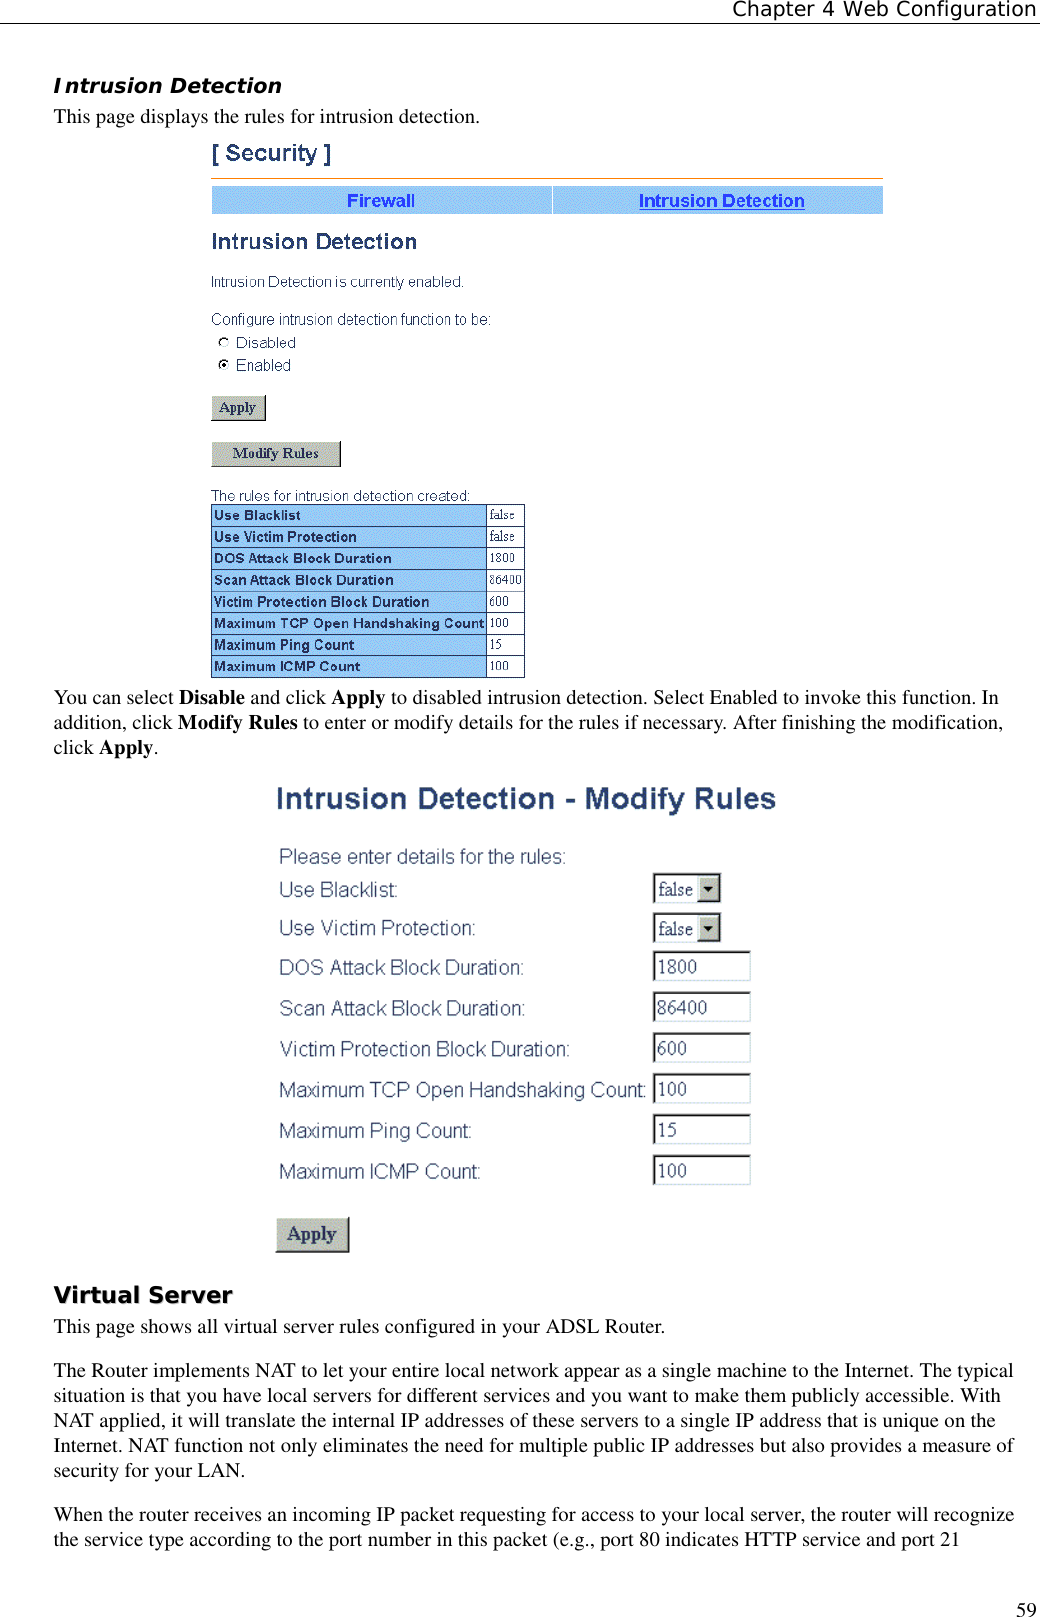 Chapter 4 Web Configuration59Intrusion DetectionThis page displays the rules for intrusion detection.You can select Disable and click Apply to disabled intrusion detection. Select Enabled to invoke this function. Inaddition, click Modify Rules to enter or modify details for the rules if necessary. After finishing the modification,click Apply.VViirrttuuaall  SSeerrvveerrThis page shows all virtual server rules configured in your ADSL Router.The Router implements NAT to let your entire local network appear as a single machine to the Internet. The typicalsituation is that you have local servers for different services and you want to make them publicly accessible. WithNAT applied, it will translate the internal IP addresses of these servers to a single IP address that is unique on theInternet. NAT function not only eliminates the need for multiple public IP addresses but also provides a measure ofsecurity for your LAN.When the router receives an incoming IP packet requesting for access to your local server, the router will recognizethe service type according to the port number in this packet (e.g., port 80 indicates HTTP service and port 21